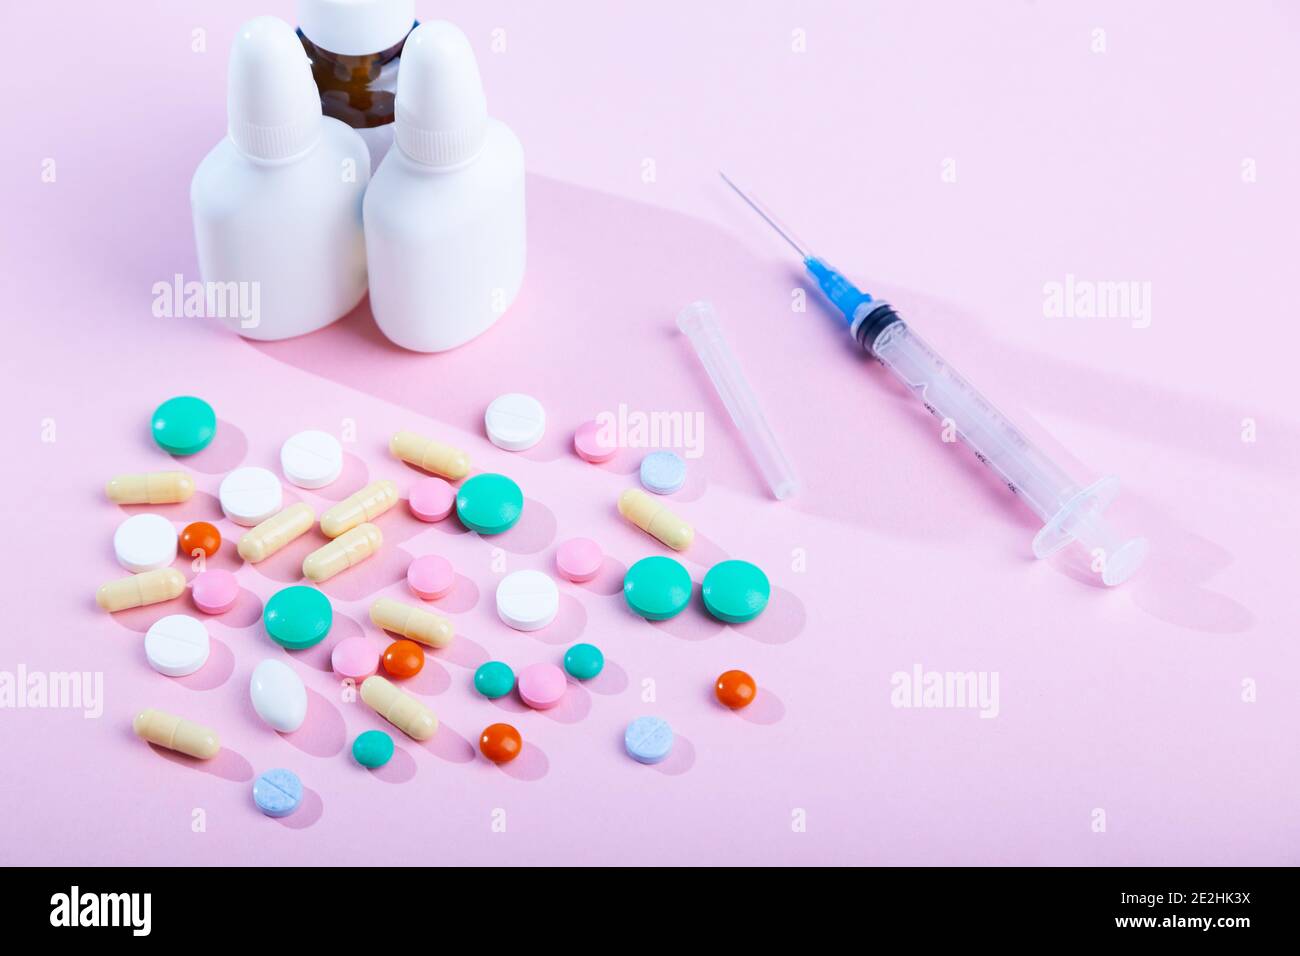 Set of many medical medicines, syringe, spray, bottles of nose drops, scattered  colorful tablets, capsules on pink background, vitamins, horizontal, Stock Photo